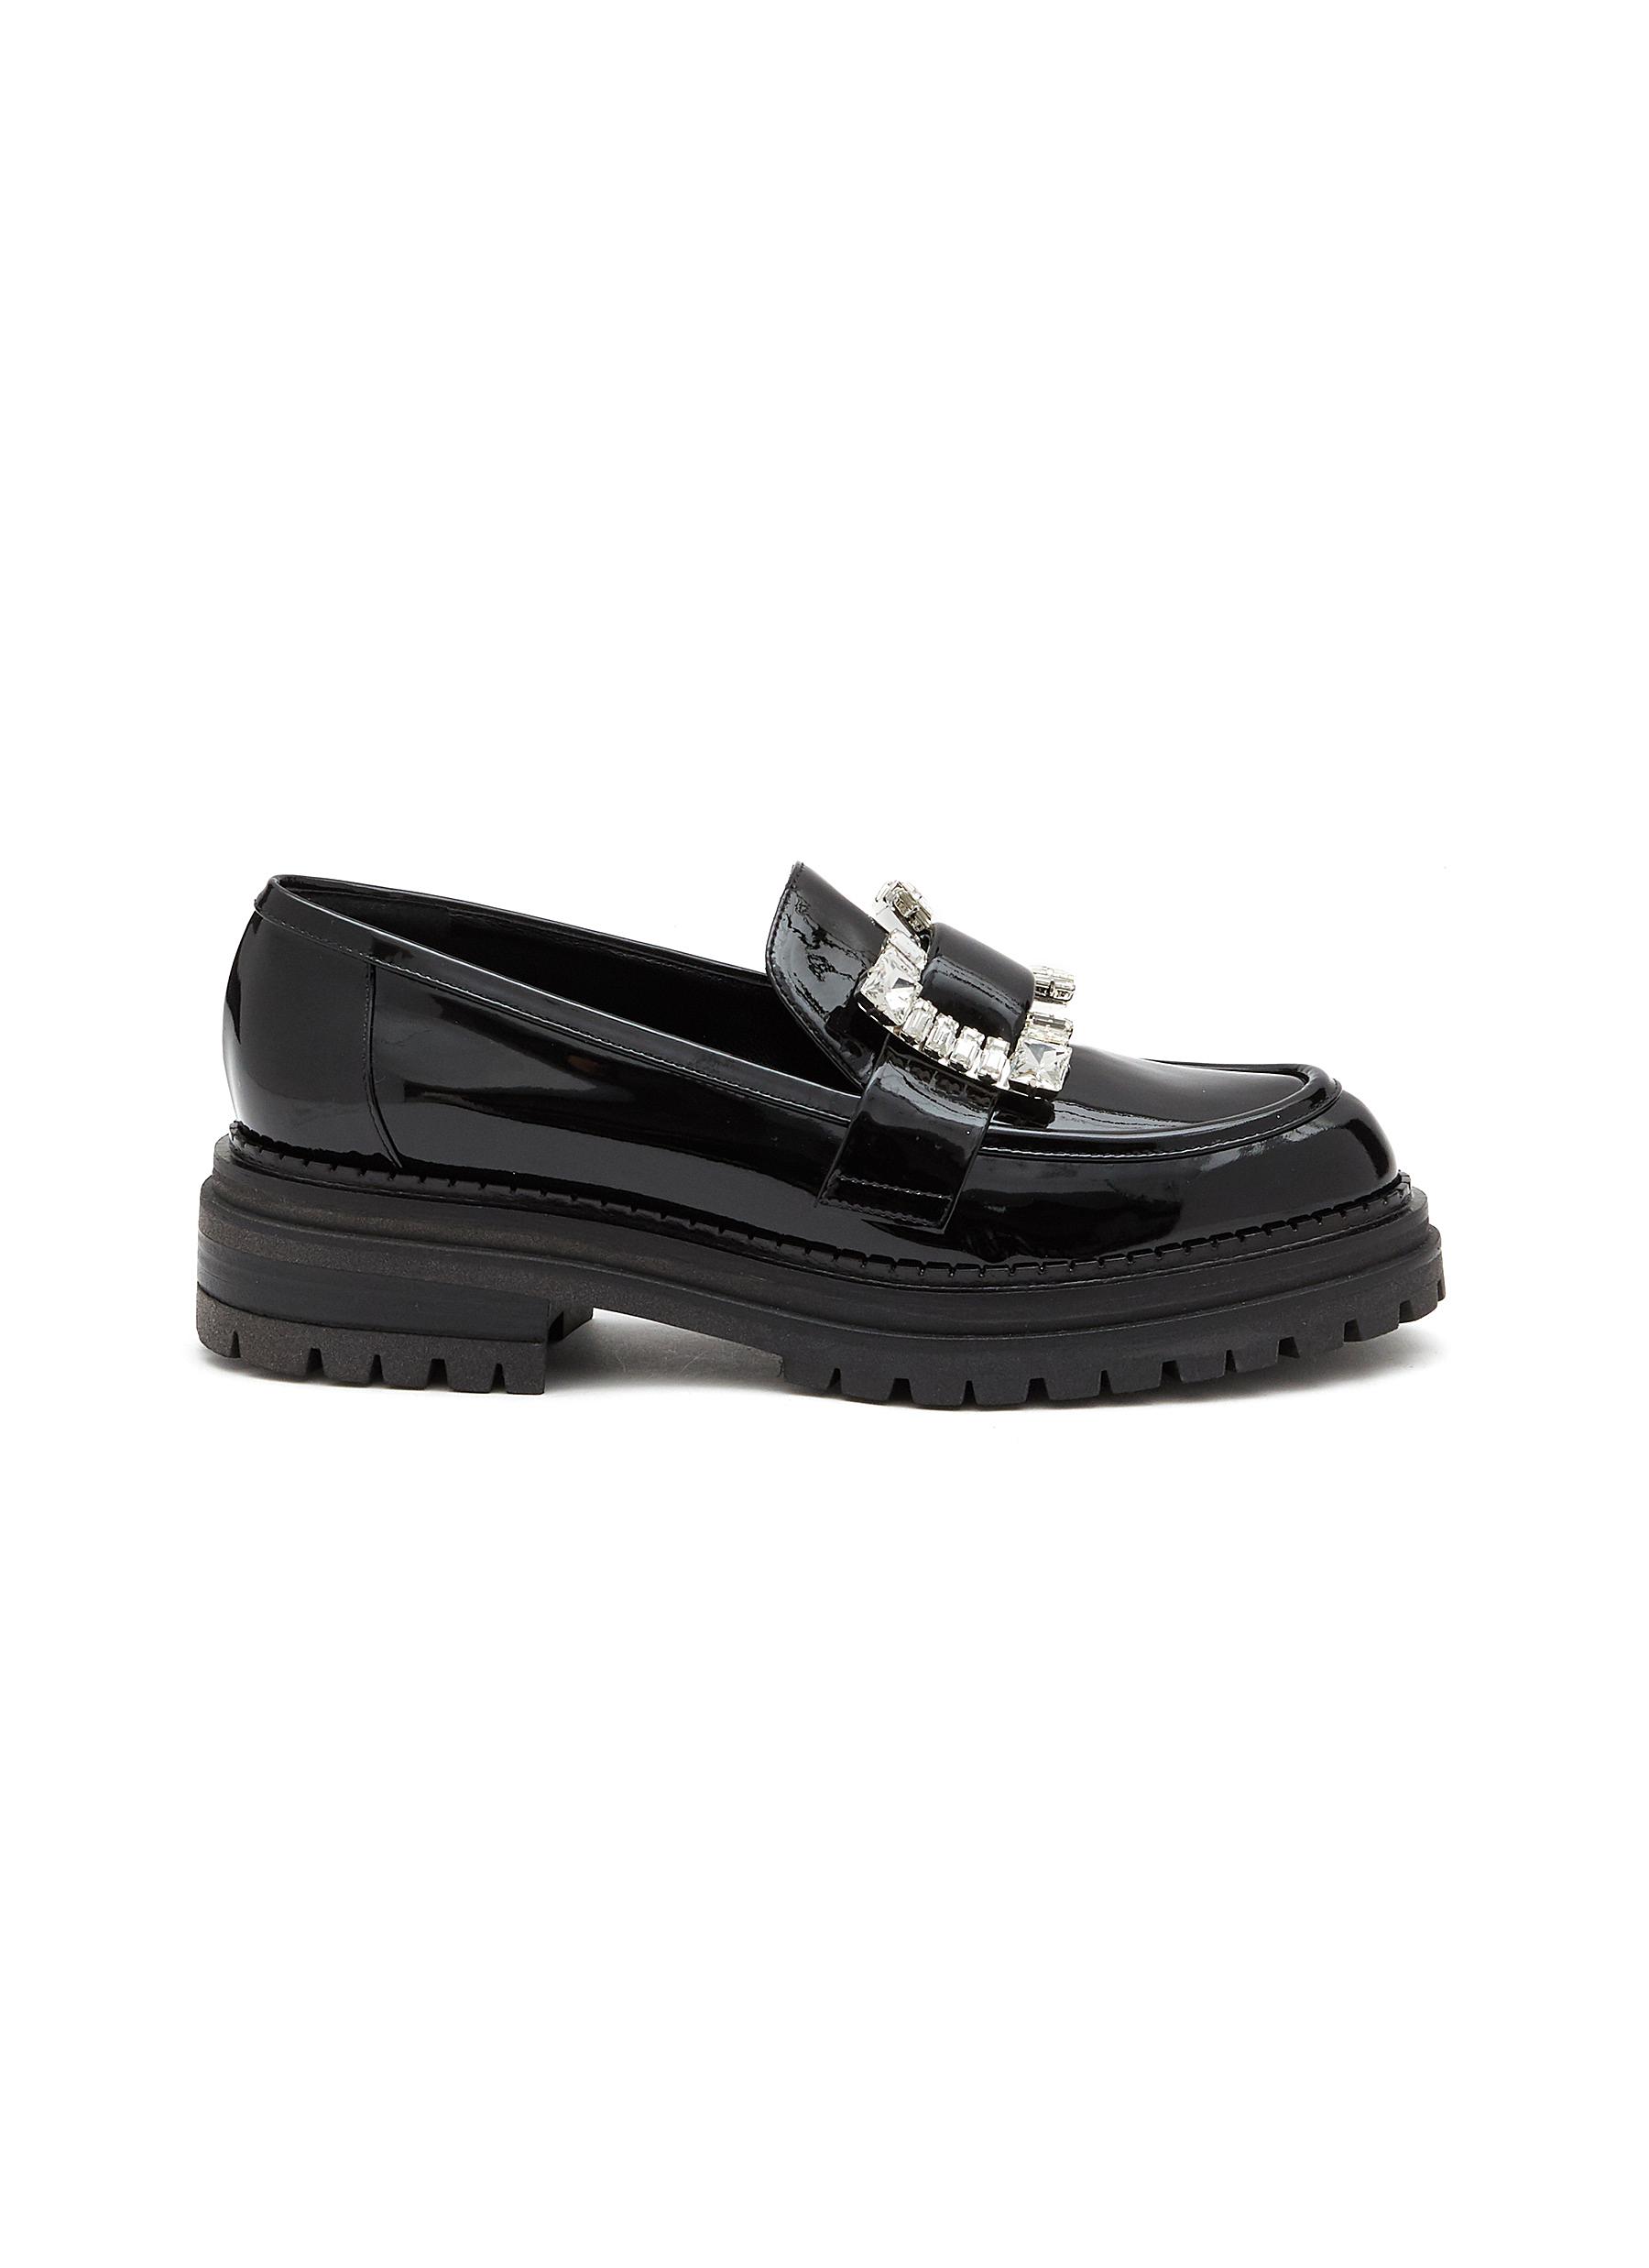 Prince Patent Leather Loafers